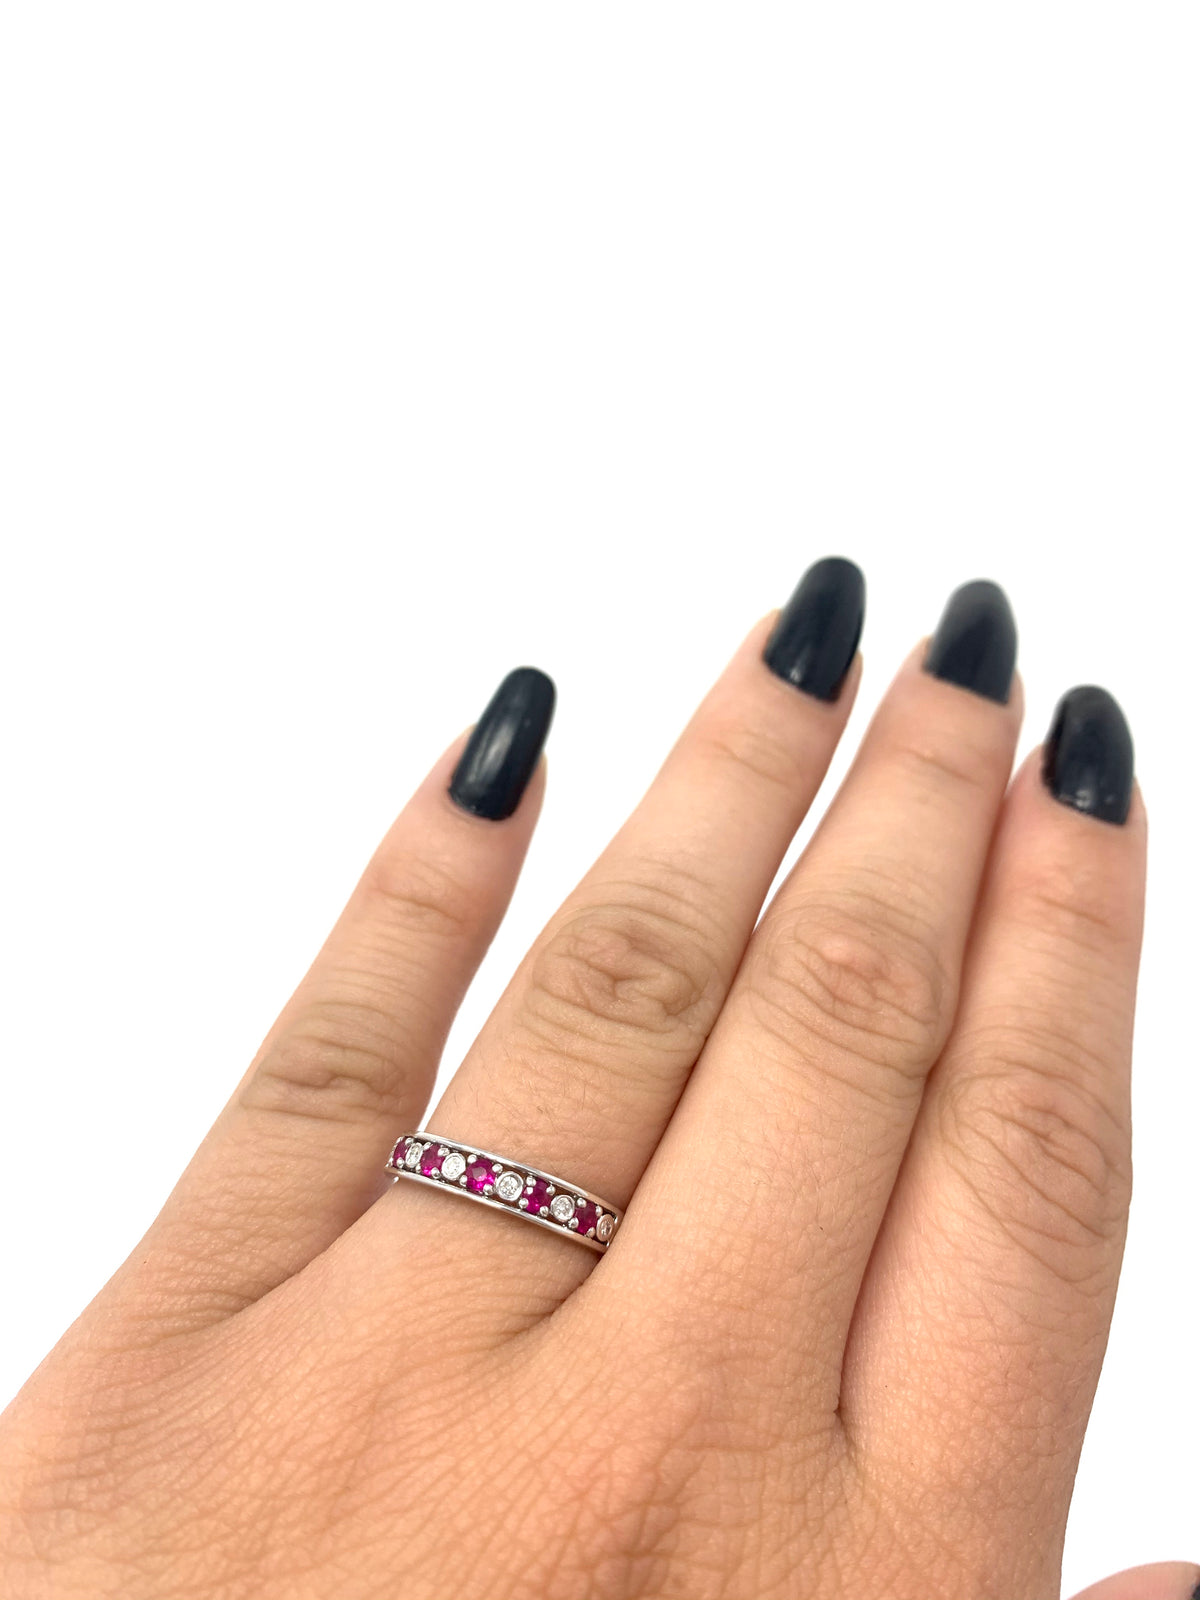 14K White Gold Ruby and Diamond Ring- Size 6.5